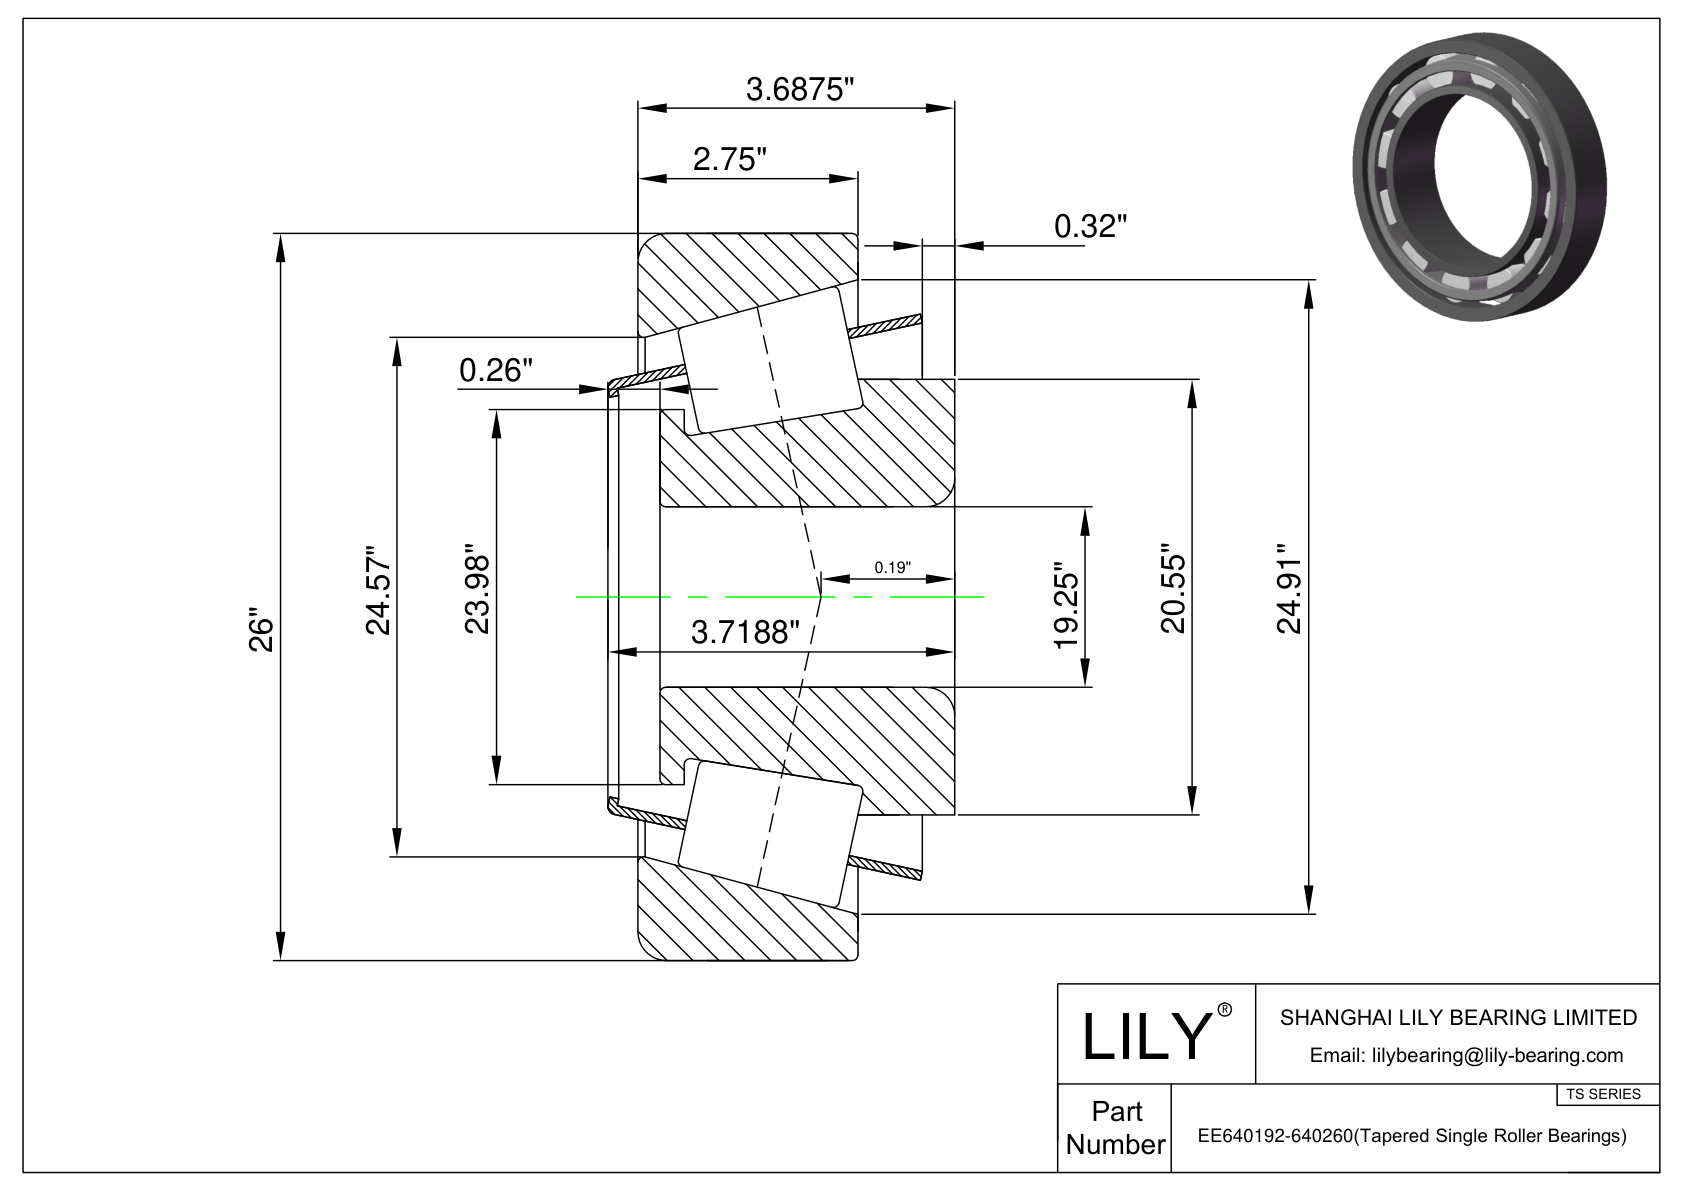 EE640192-640260 TS (Tapered Single Roller Bearings) (Imperial) cad drawing